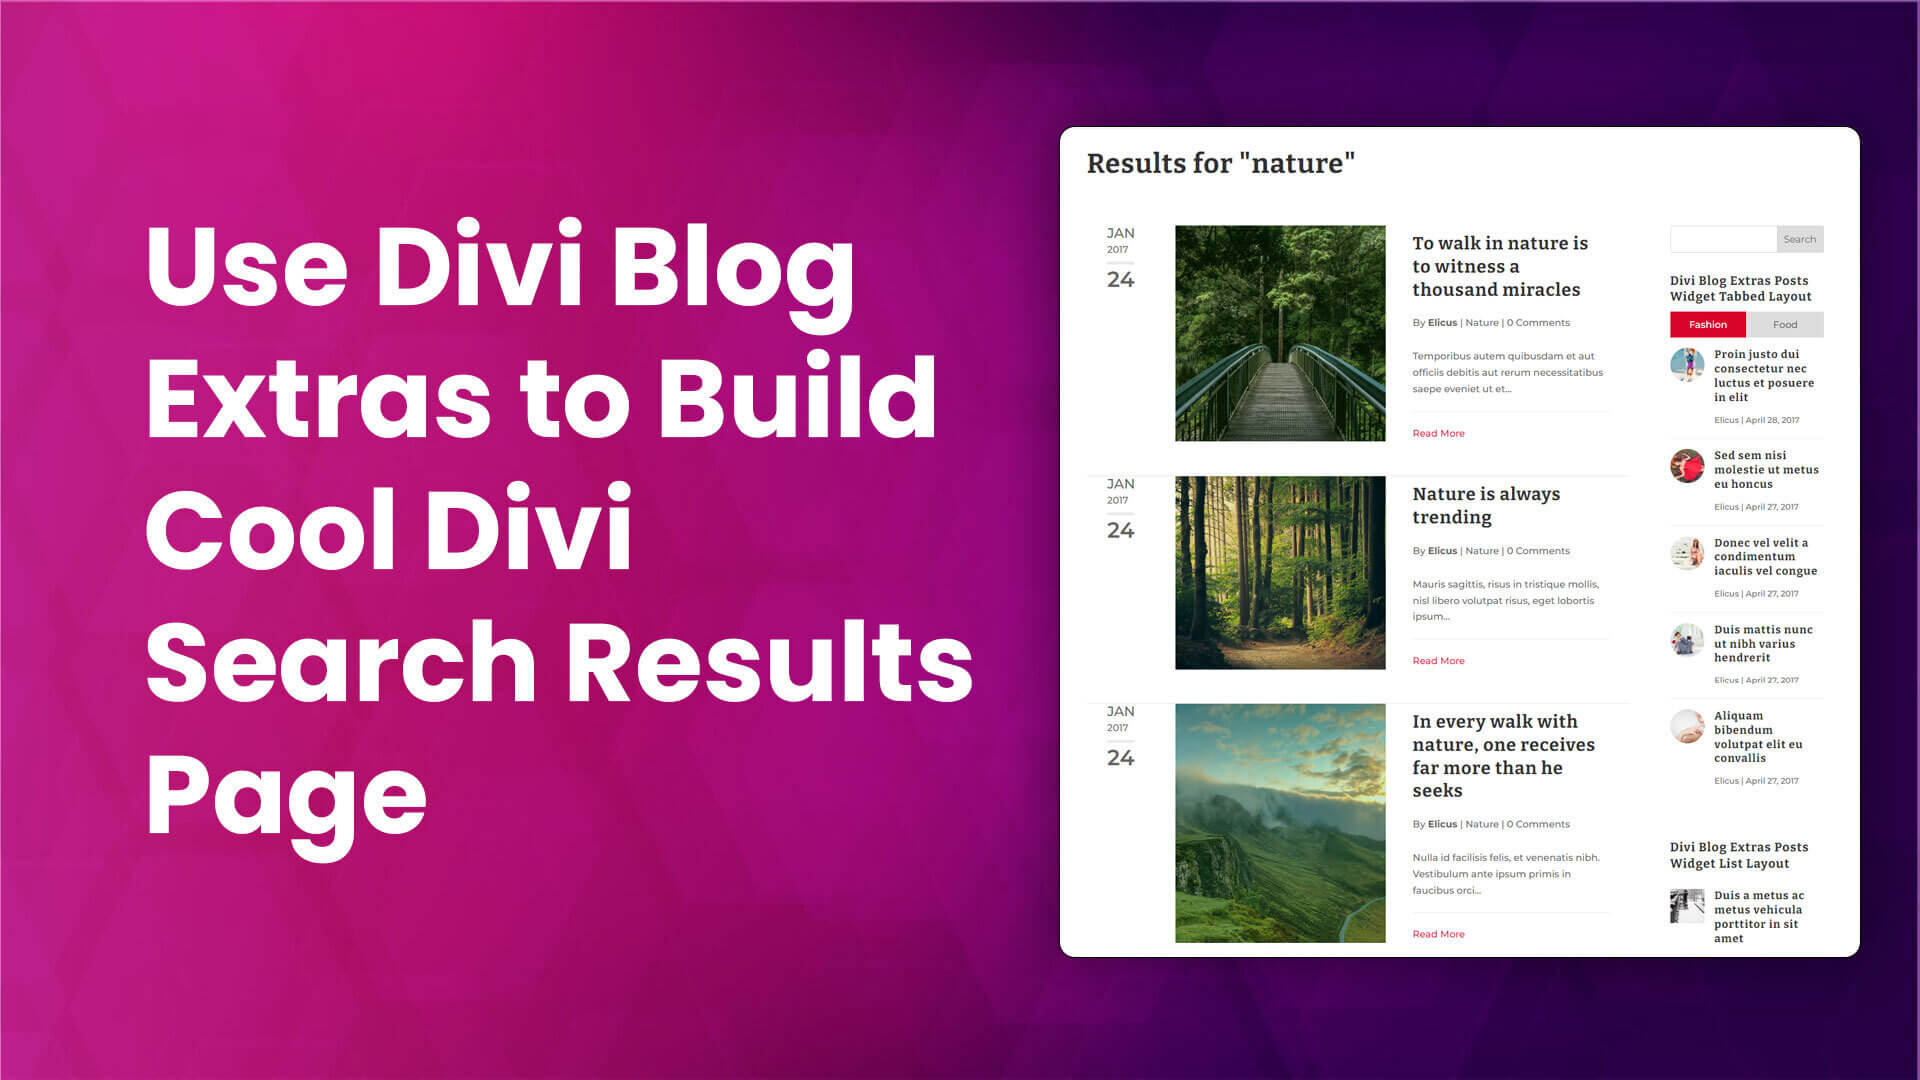 Use Divi Blog Extras to Create Divi Search Results Page